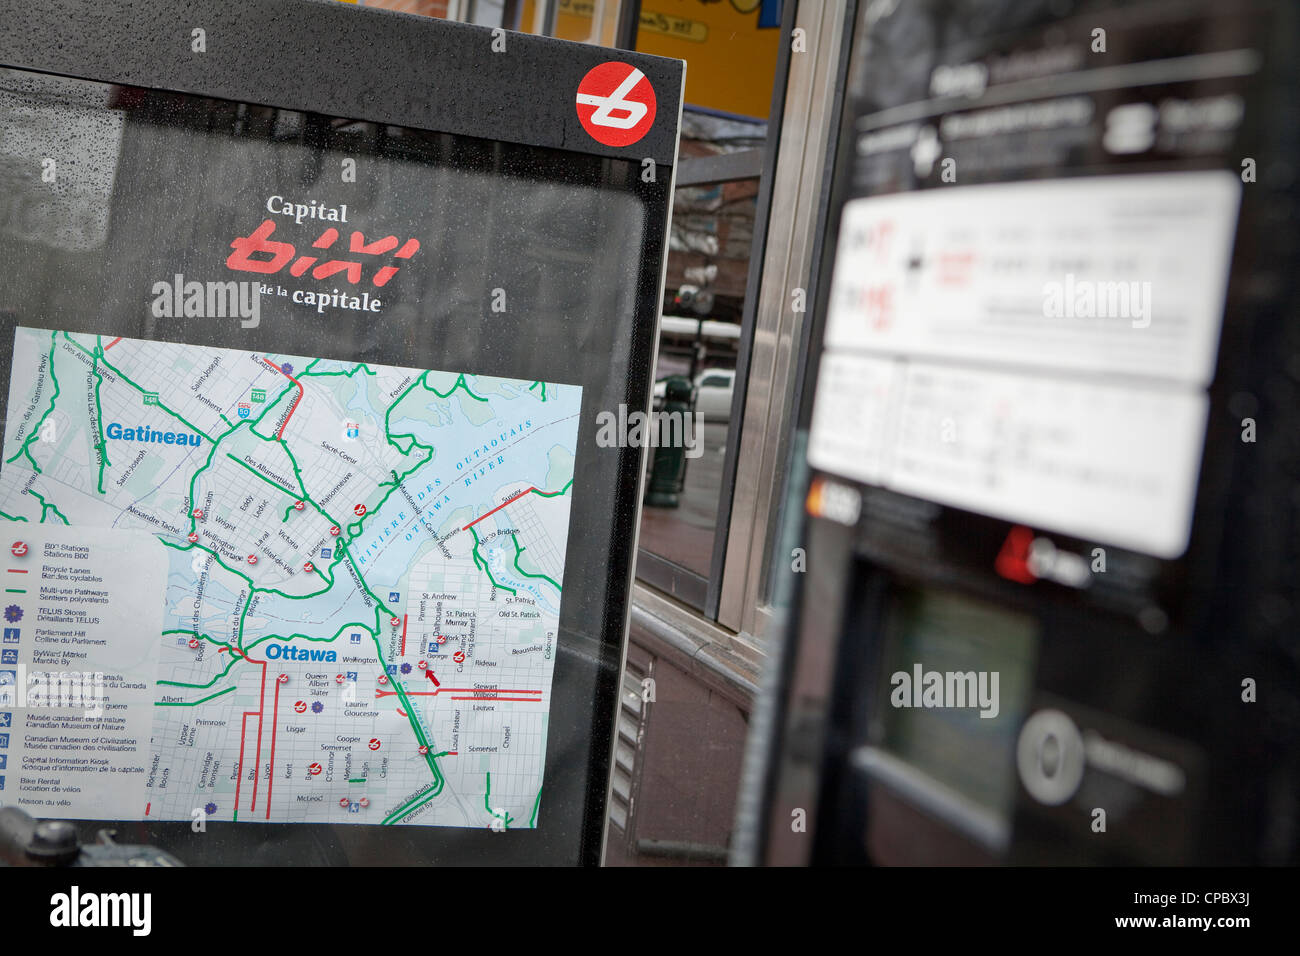 A Capital Bixi stations map is pictured in Ottawa Stock Photo